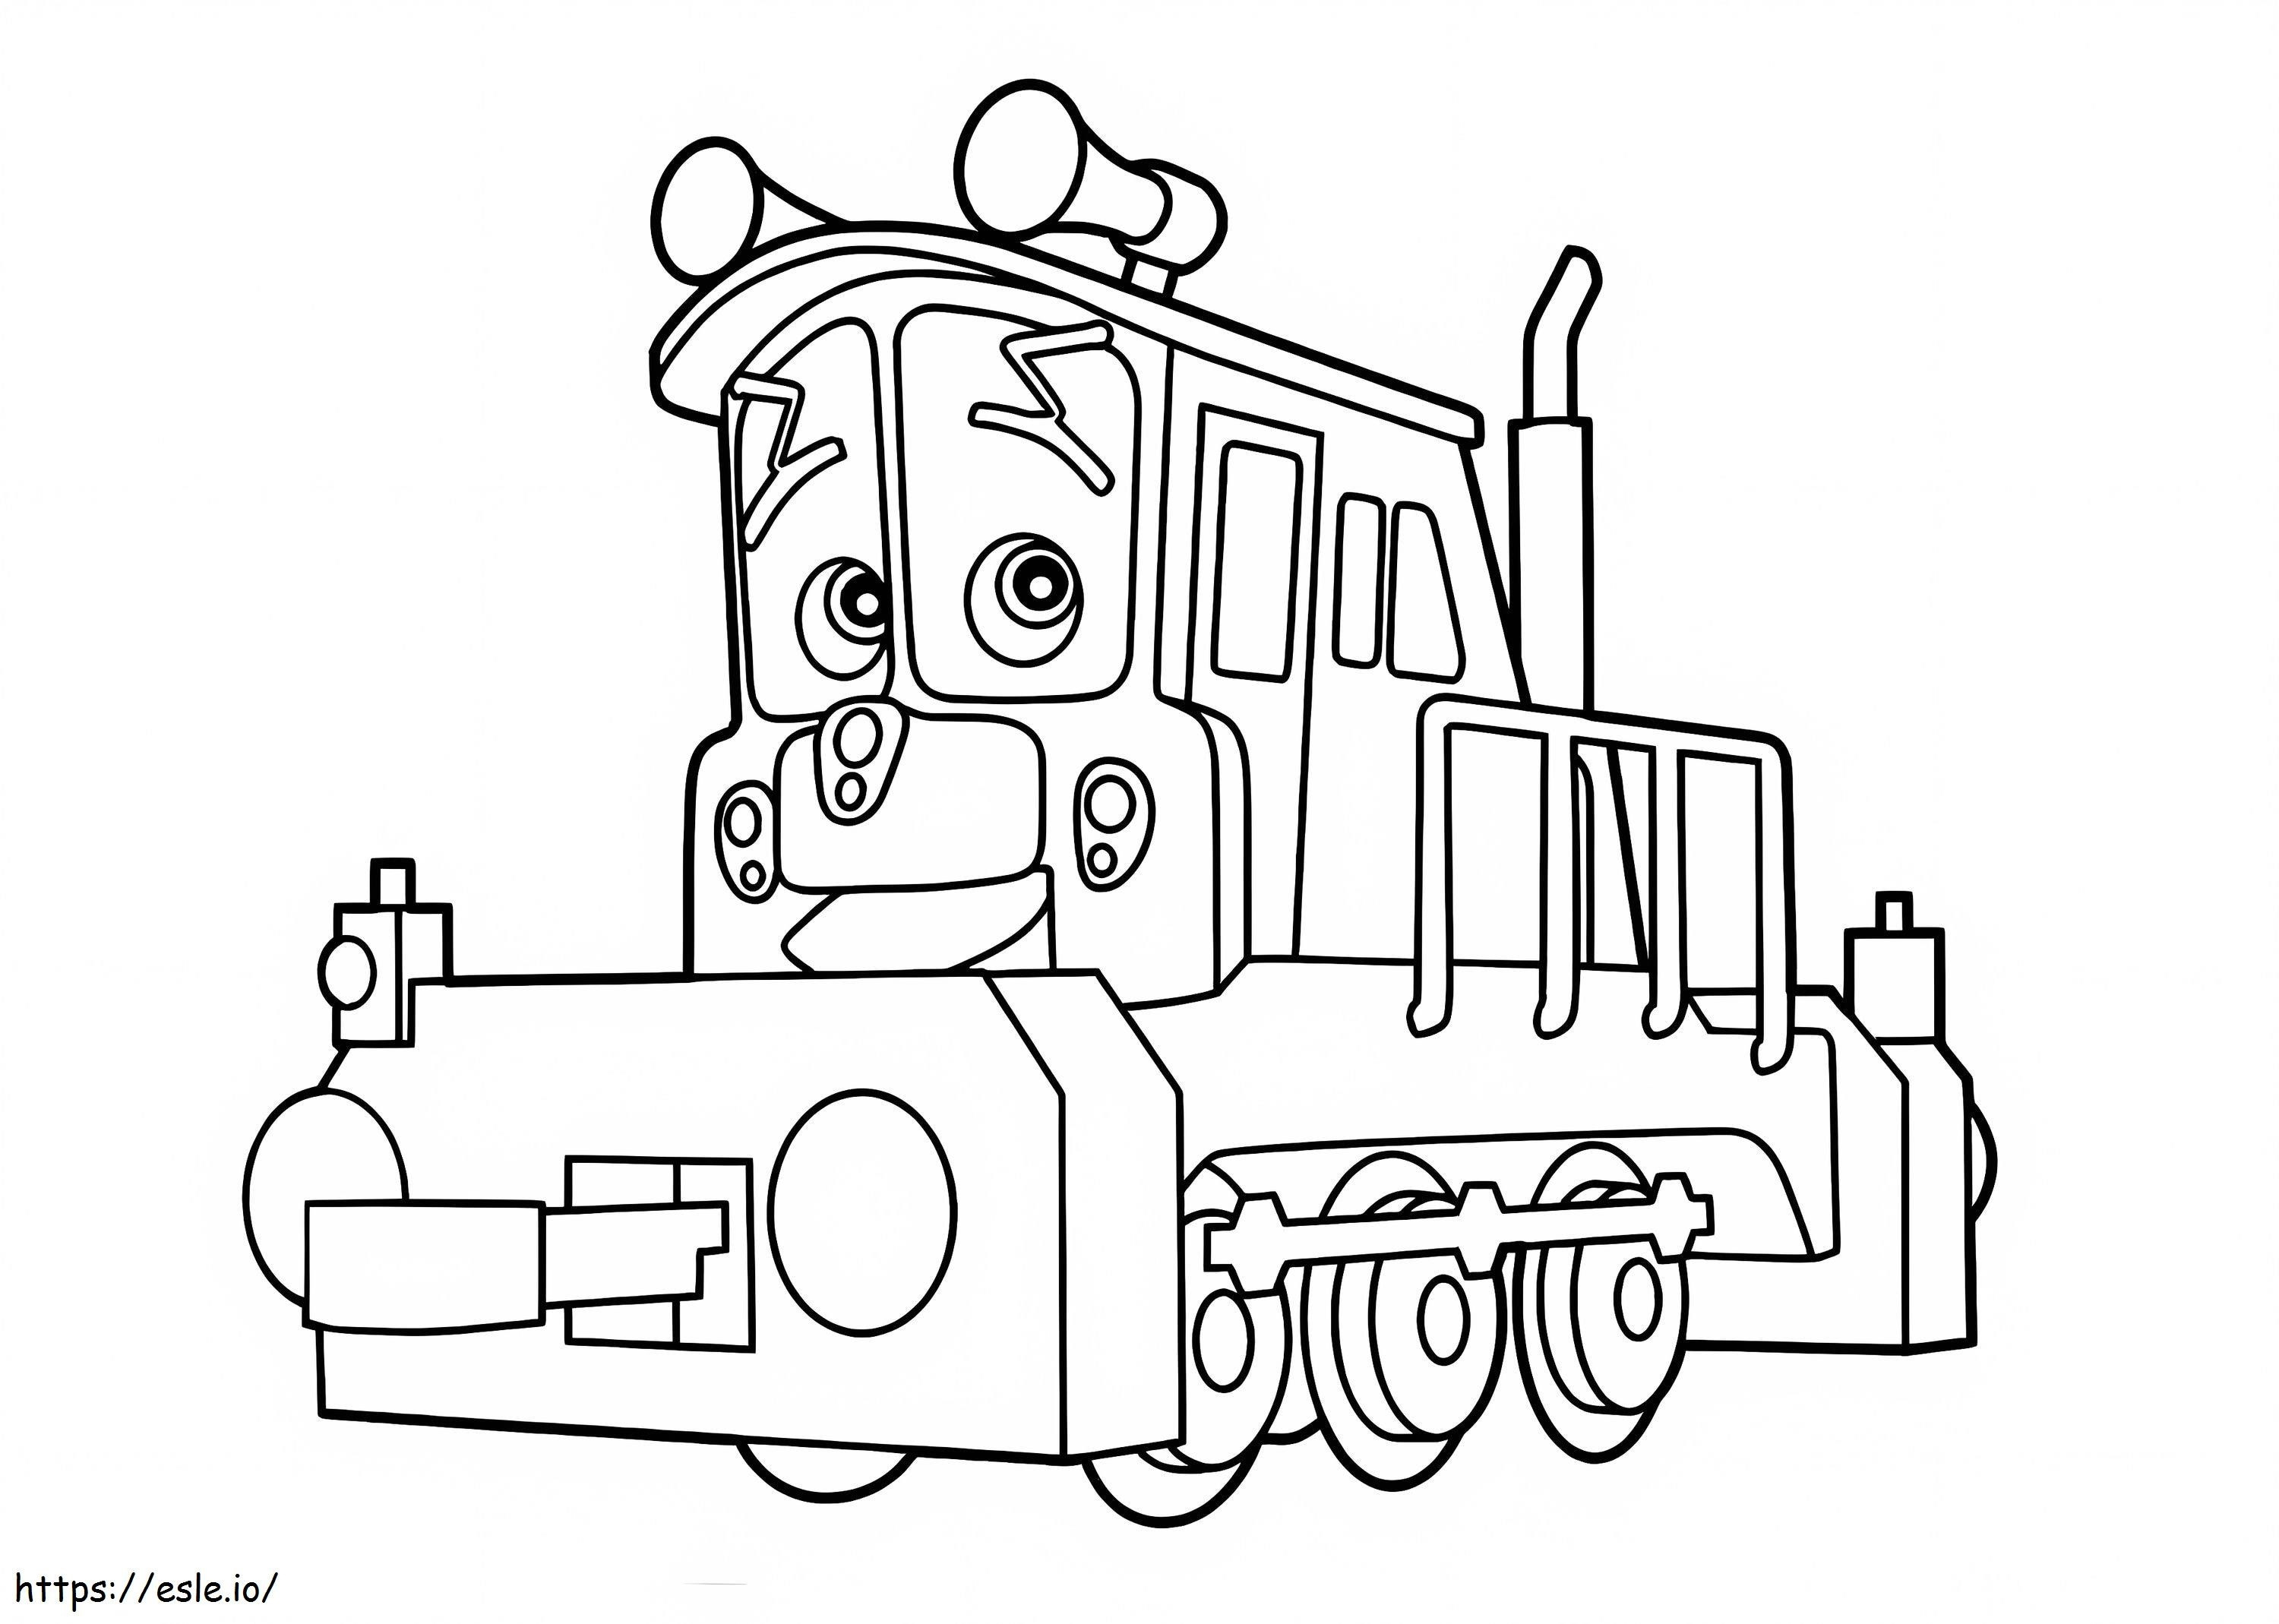 Calley From Chuggington coloring page